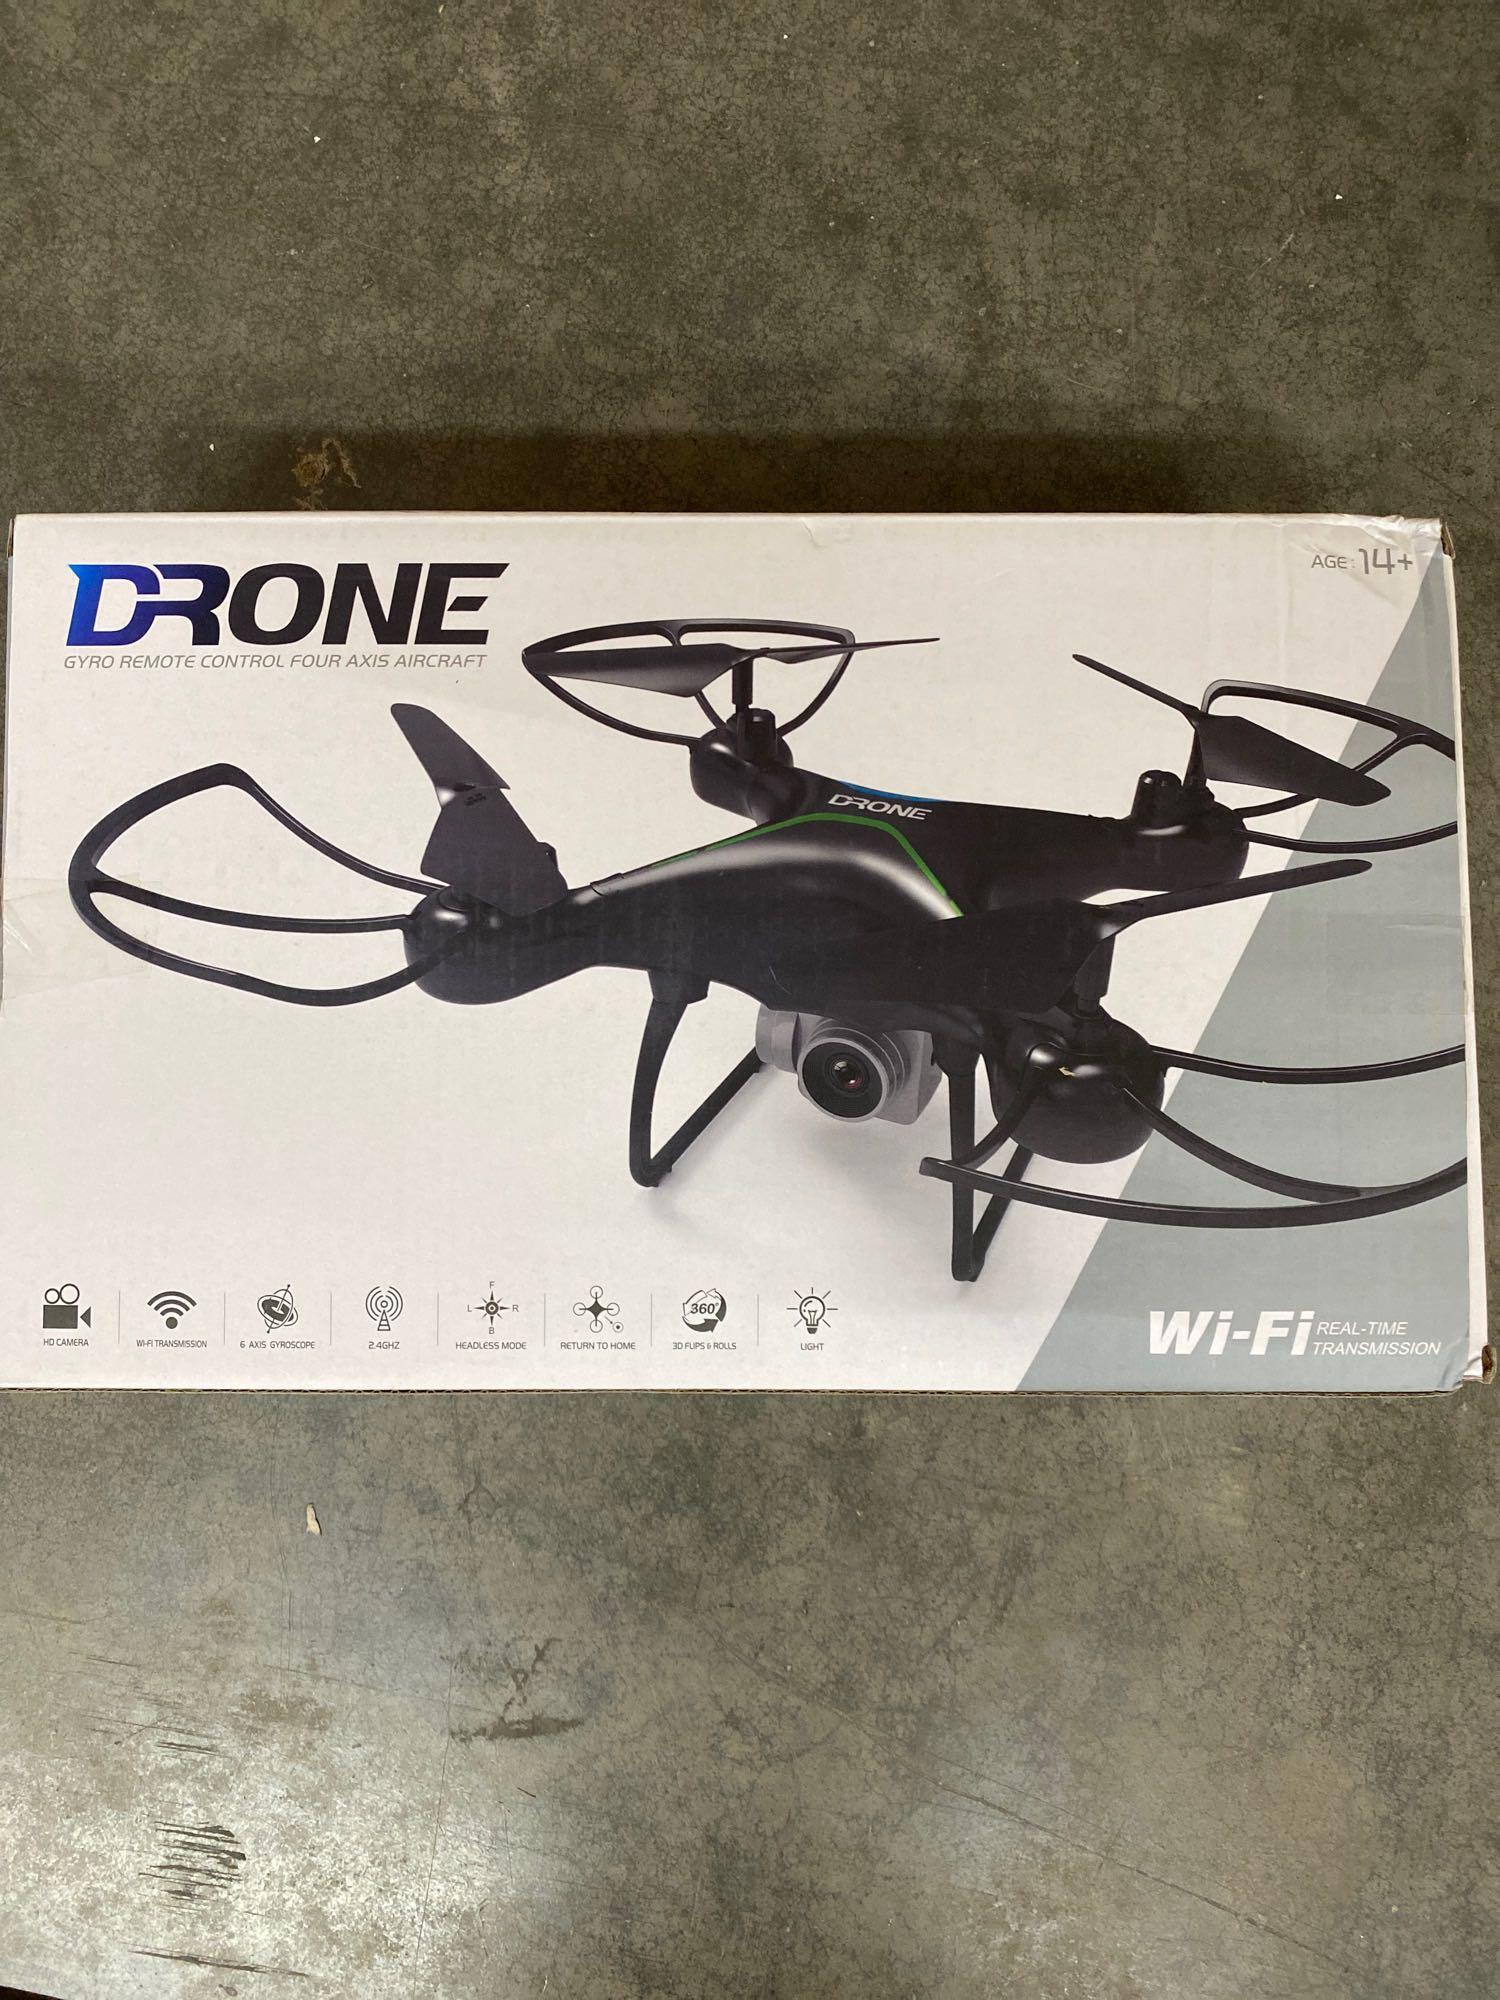 Professional 4 Axis Drone with Remote Control HD Camera and WiFi - White, $275.00 MSRP (BRAND NEW)